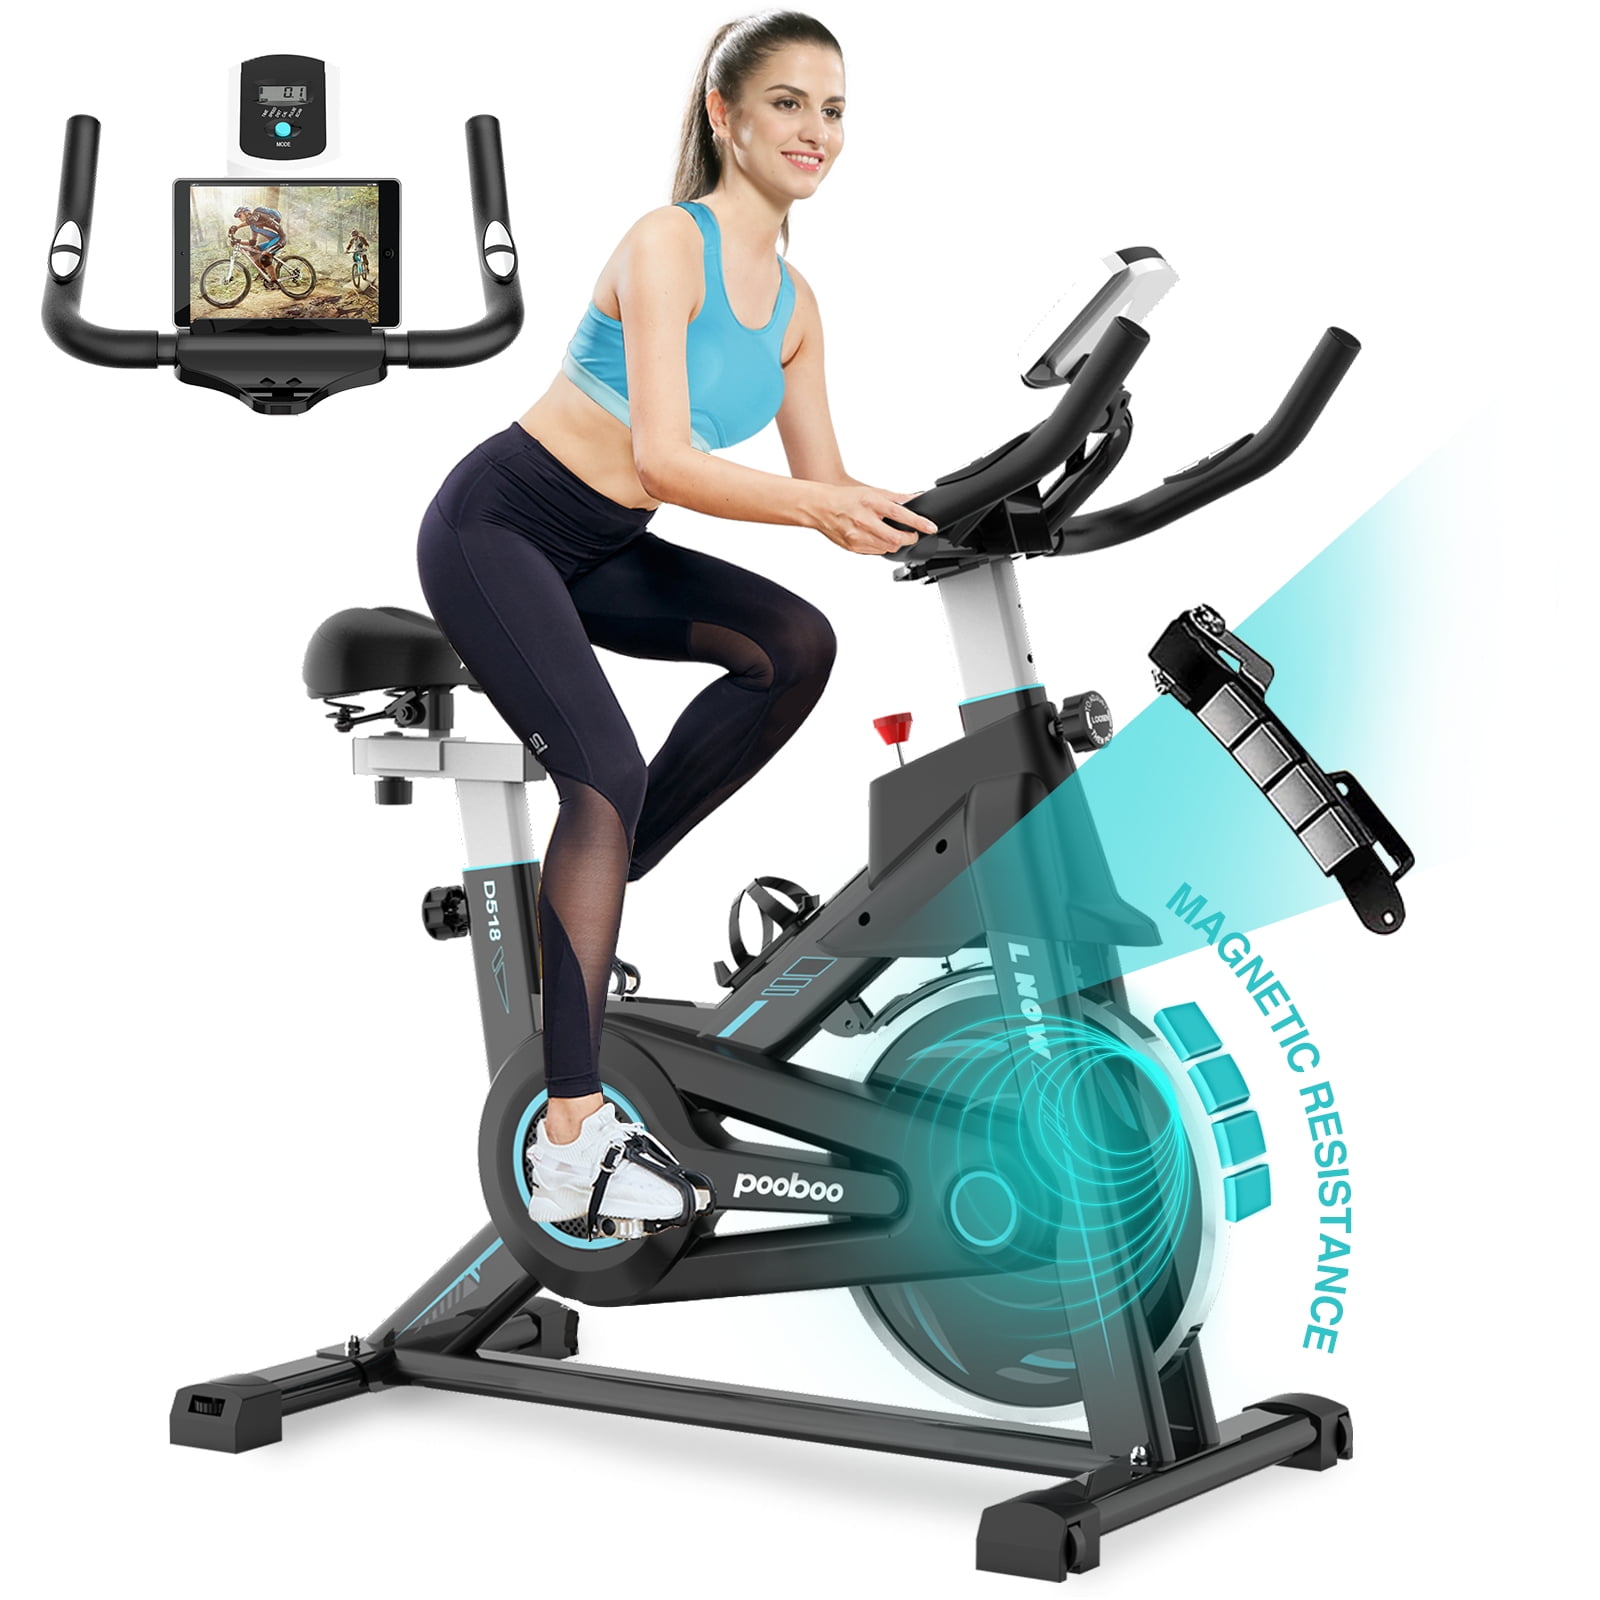 Details about    Pooboo Indoor Cycling Magnetic Resistance Stationary Cardio Cycle Exercise Bike 